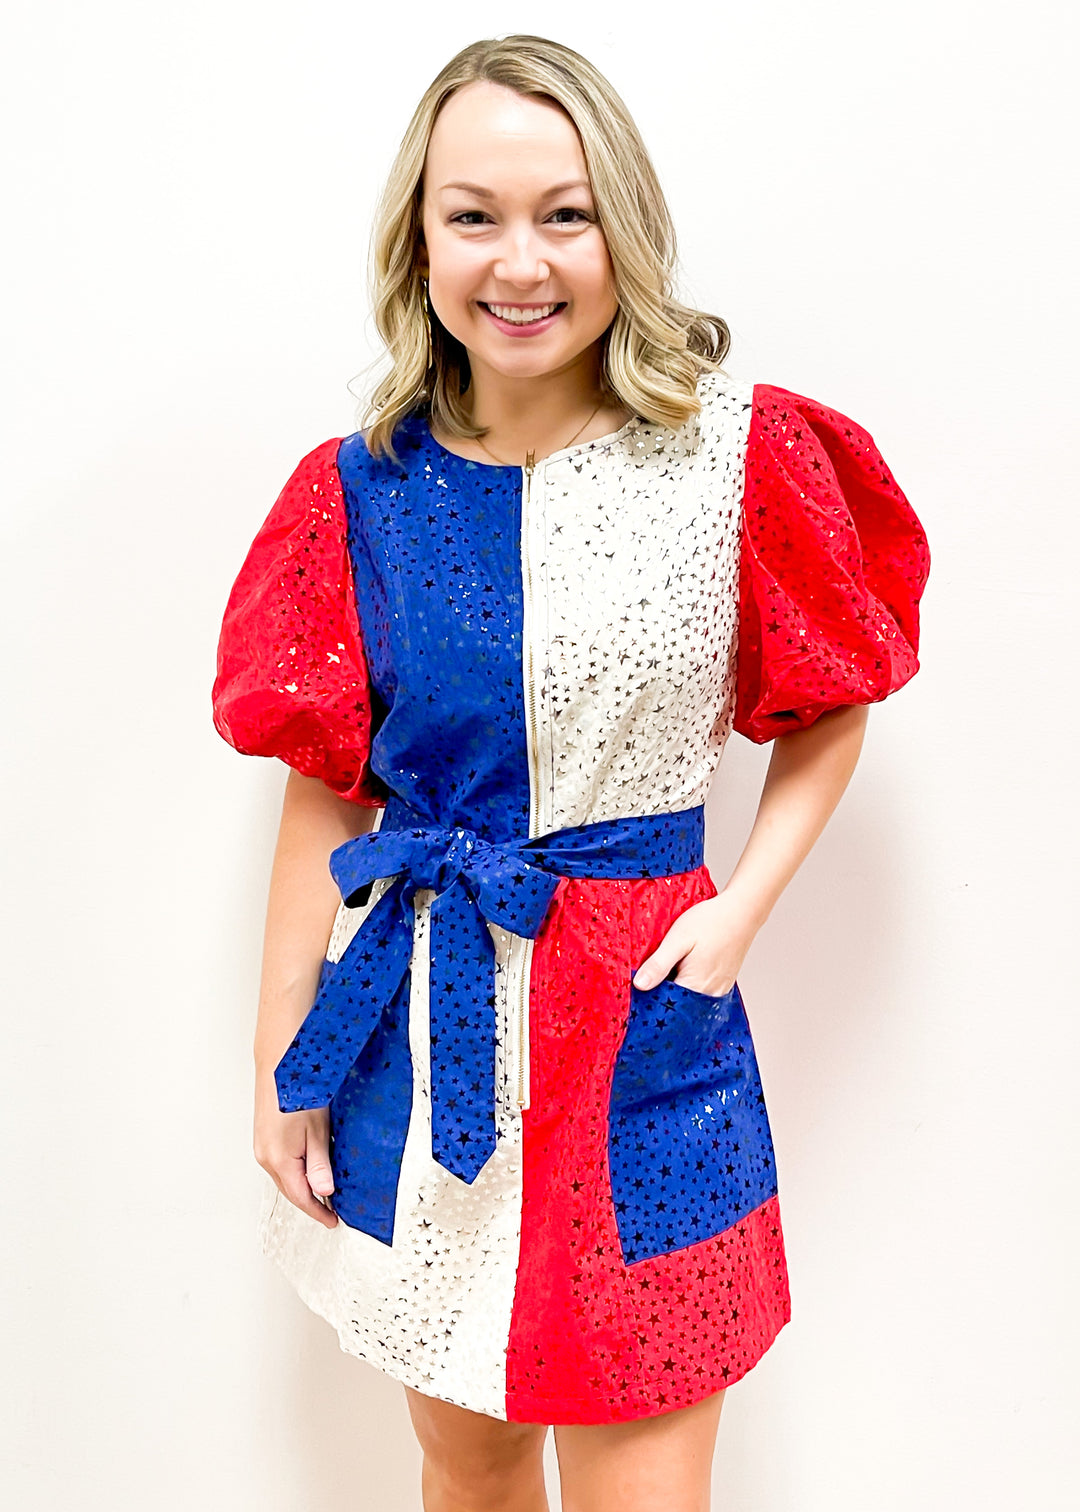 Queen of Sparkles Red, White, & Blue Colorblock Star Dress - Gabrielle's Biloxi